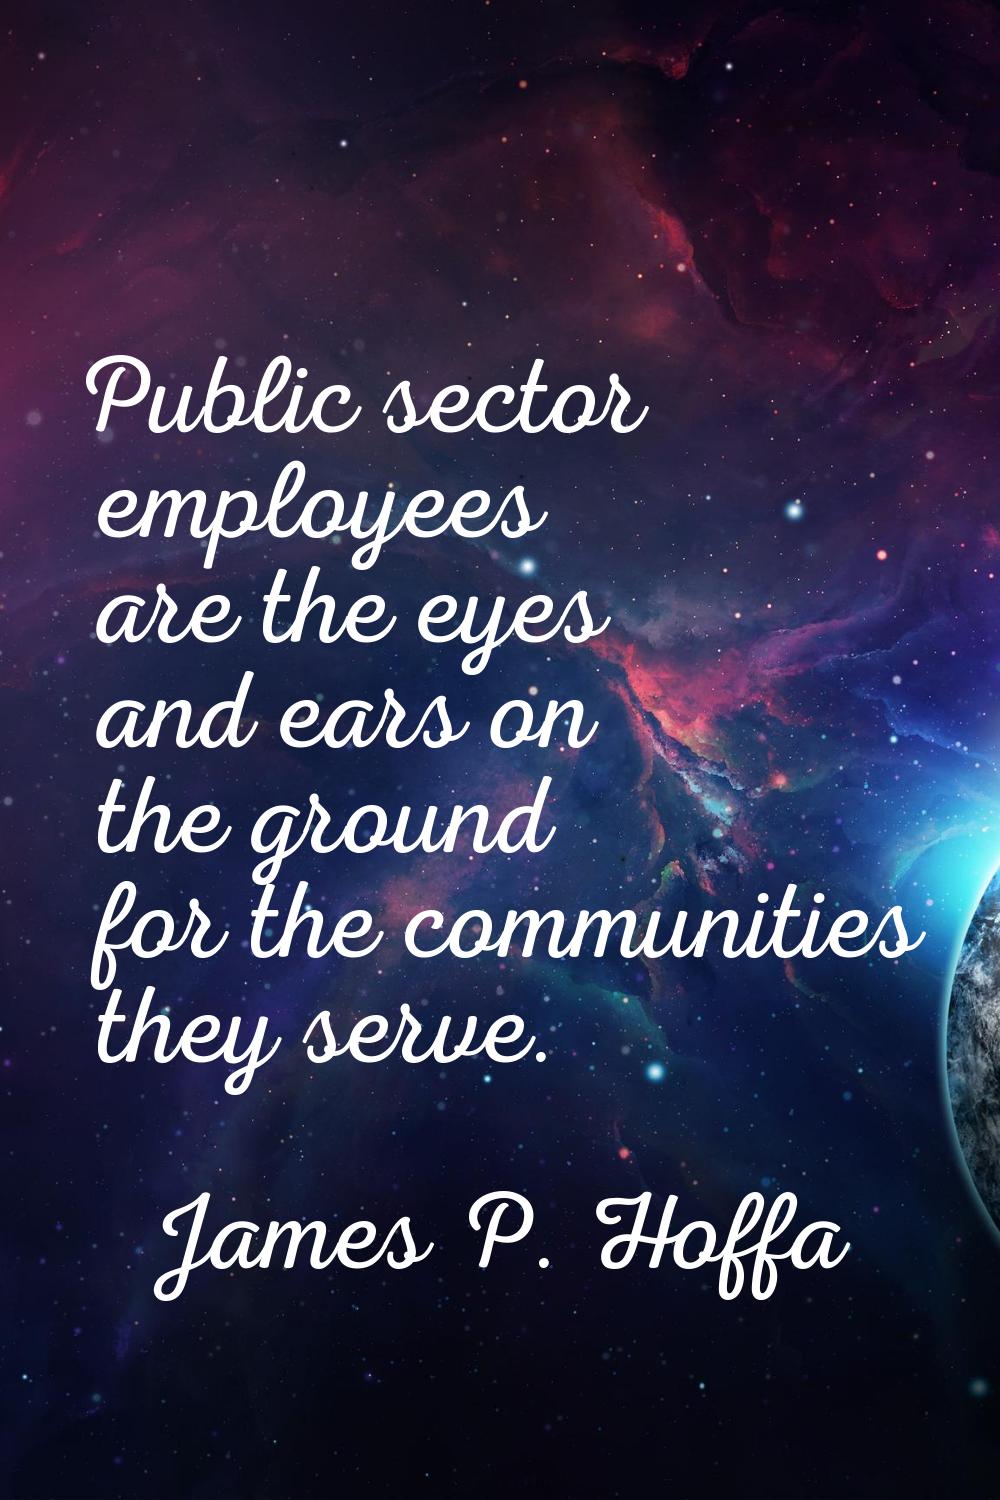 Public sector employees are the eyes and ears on the ground for the communities they serve.